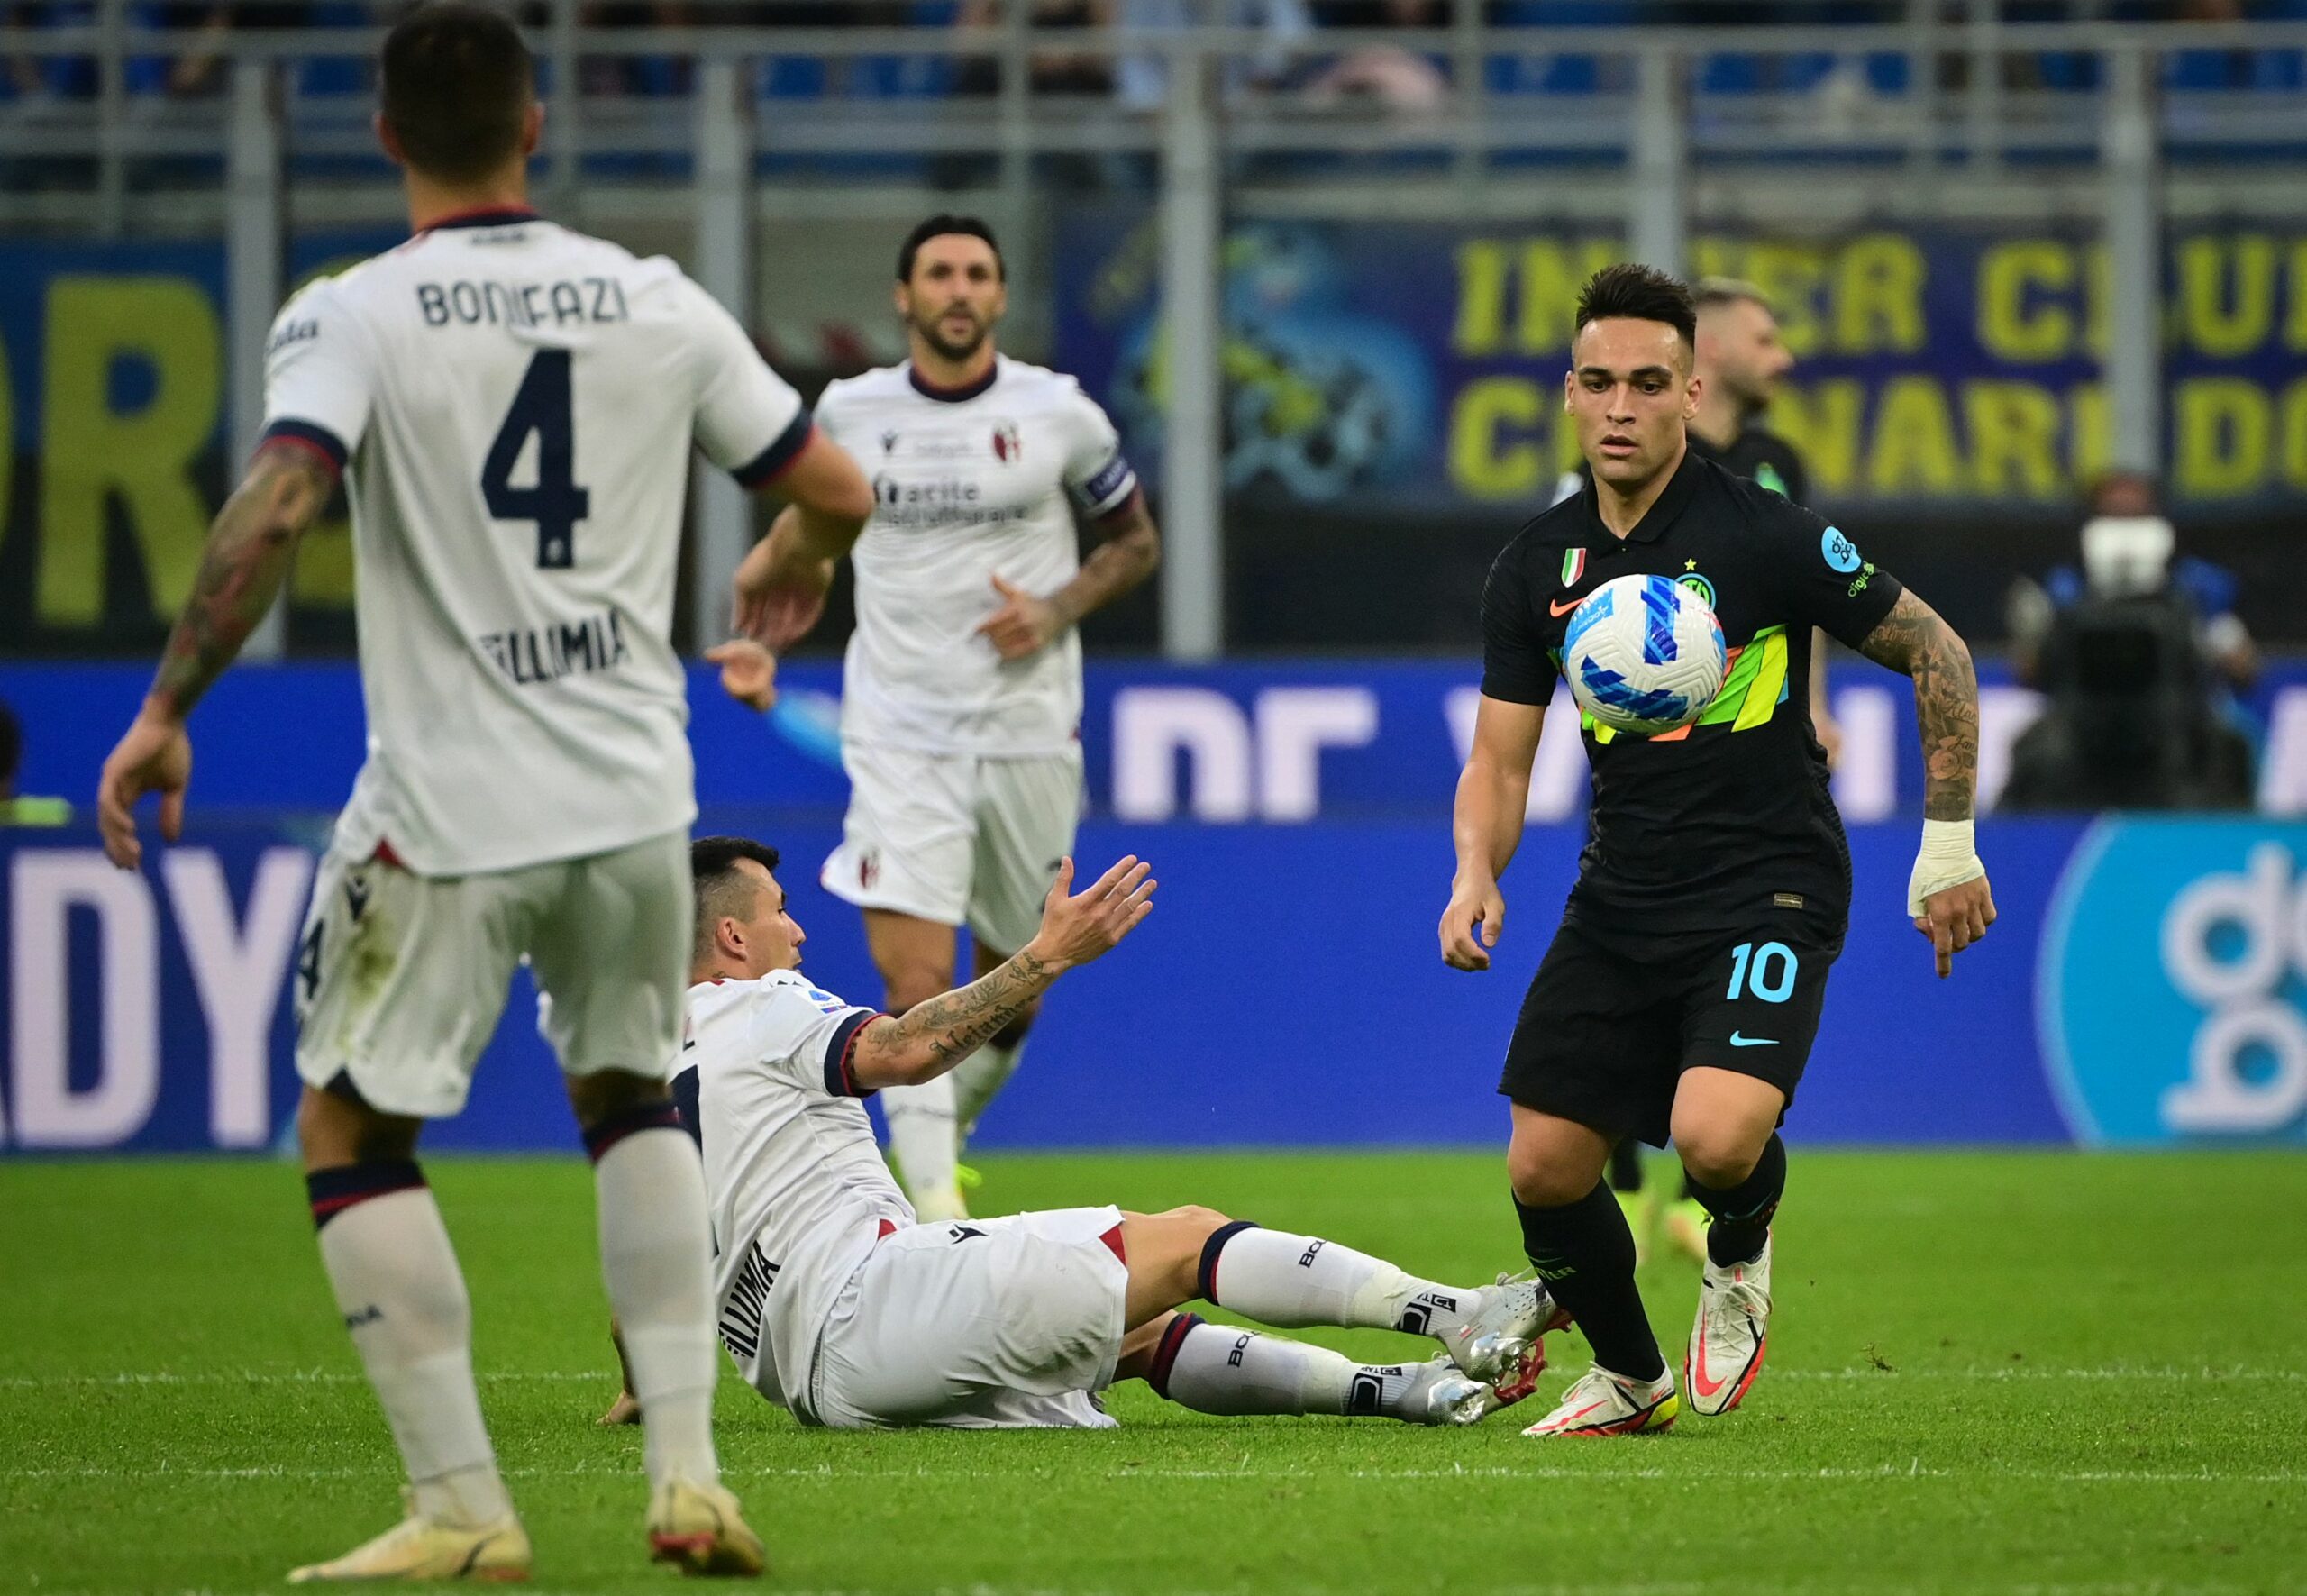 Inter Milan's Argentine forward Lautaro Martinez (R) controls the ball during the Italian Serie A football match between Inter Milan and Bologna at the San Siro stadium in Milan, on September 18, 2021. (Photo by MIGUEL MEDINA / AFP) (Photo by MIGUEL MEDINA/AFP via Getty Images)